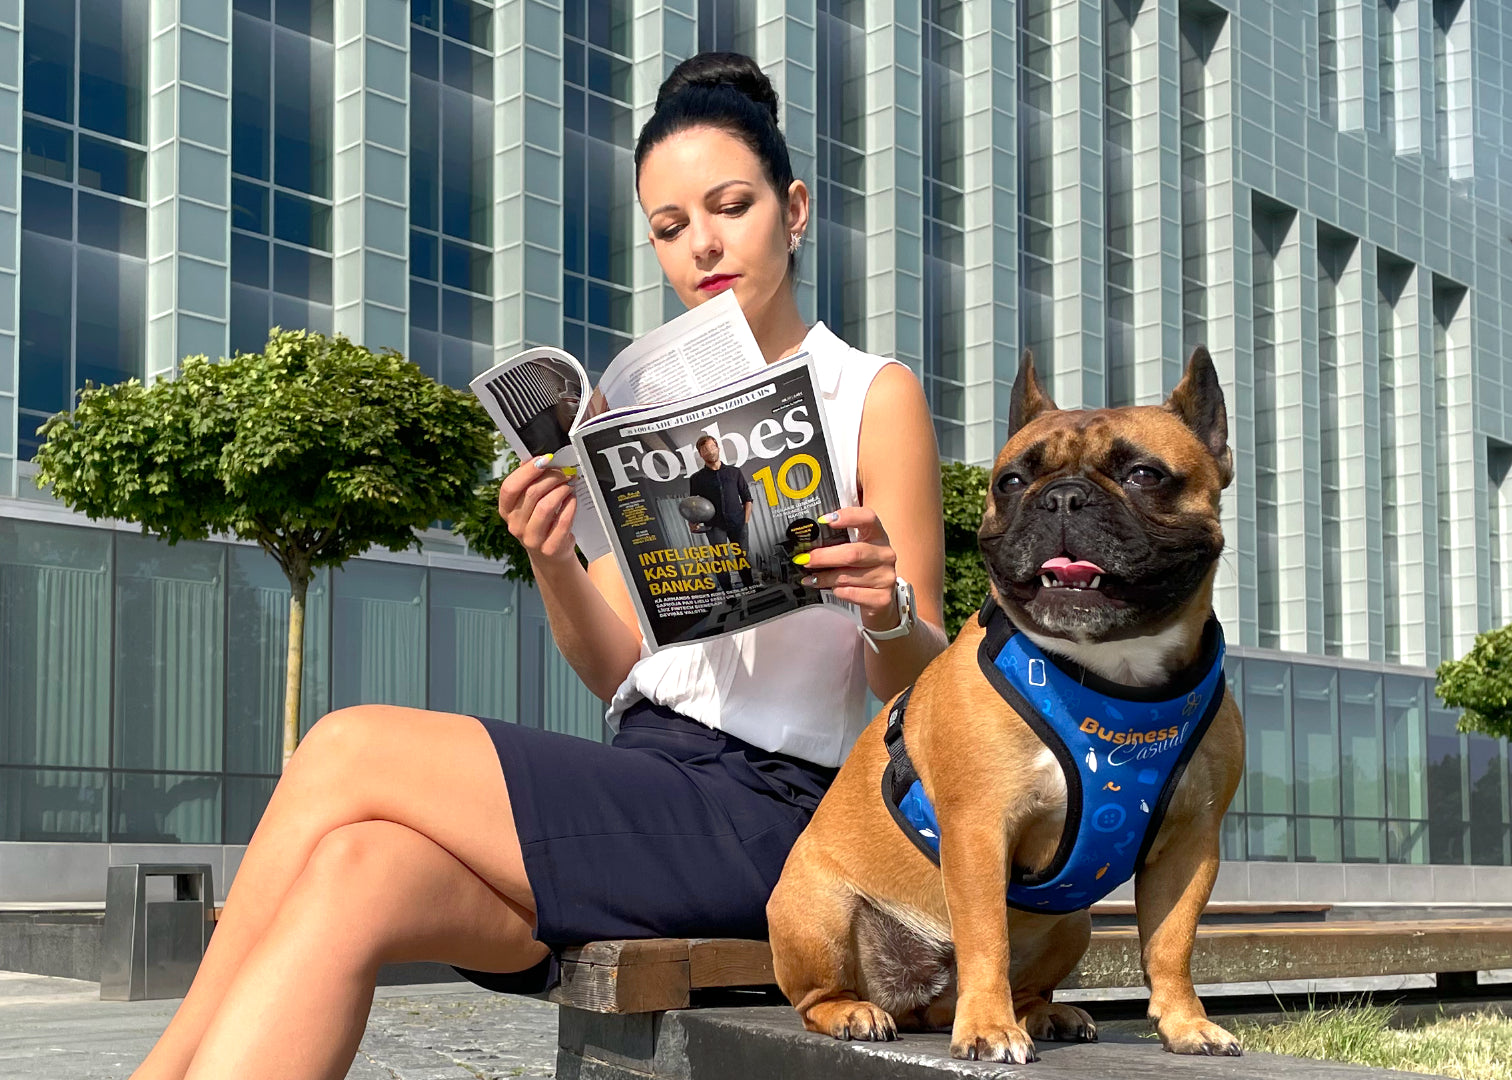 A french bulldog wearing blue themed business casual design harness sitting next to her mom who's reading Forbes outside of a business building, on a bench surrounded by a few artificially planted trees.